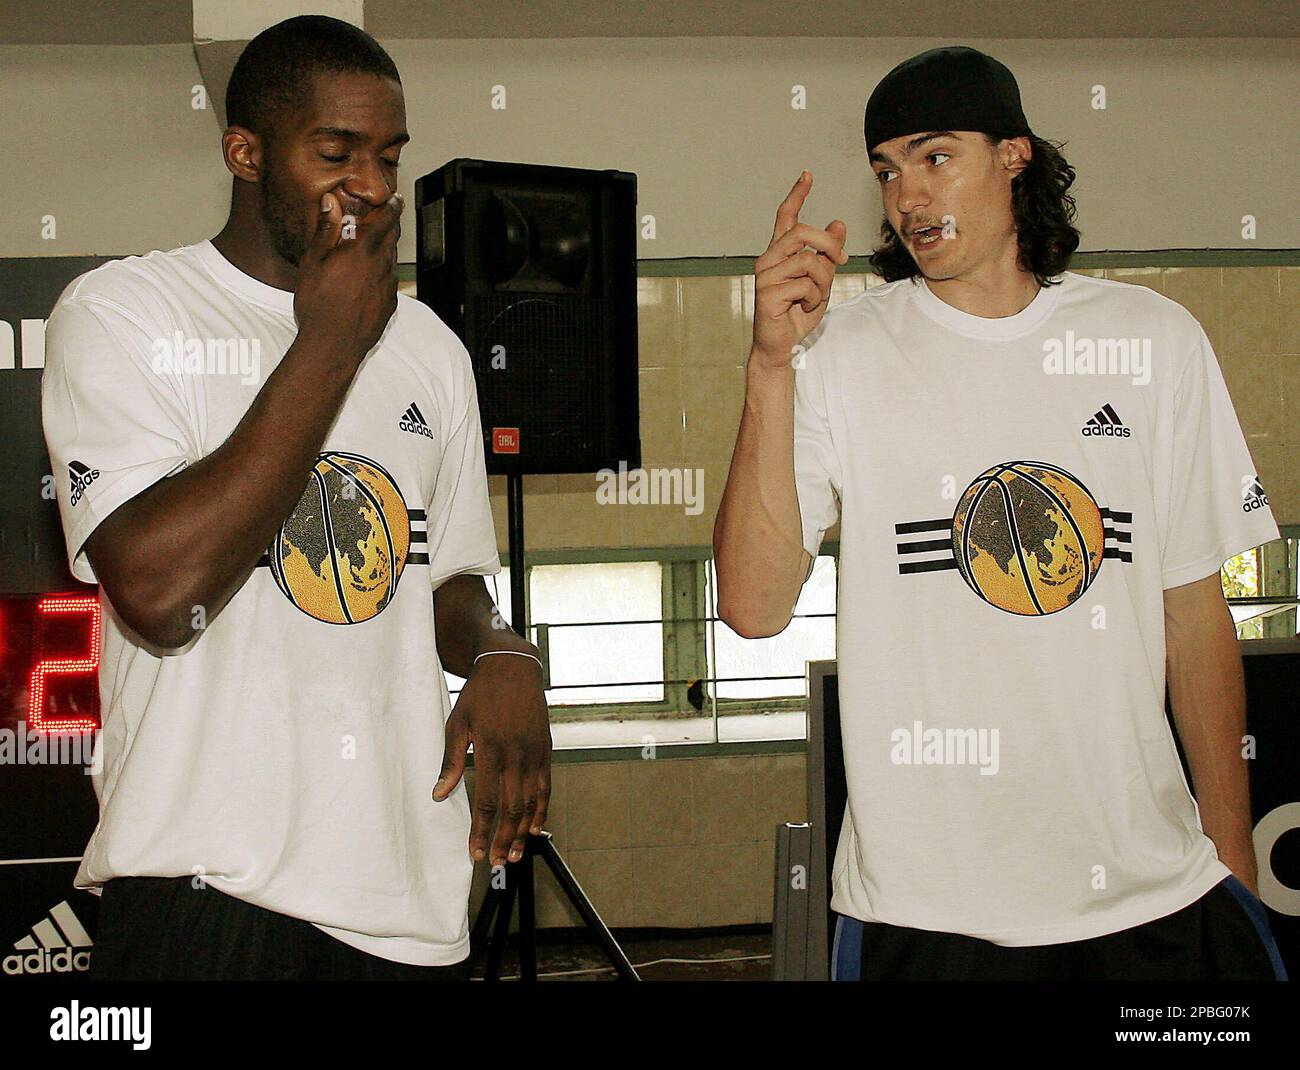 NBA stars Adam Morrison of the Charlotte Bobcats, right, and Martell  Webster of the Portland Trail Blazers chat before a press conference of the  Adidas superstar camp Tuesday, May 22, 2007 in